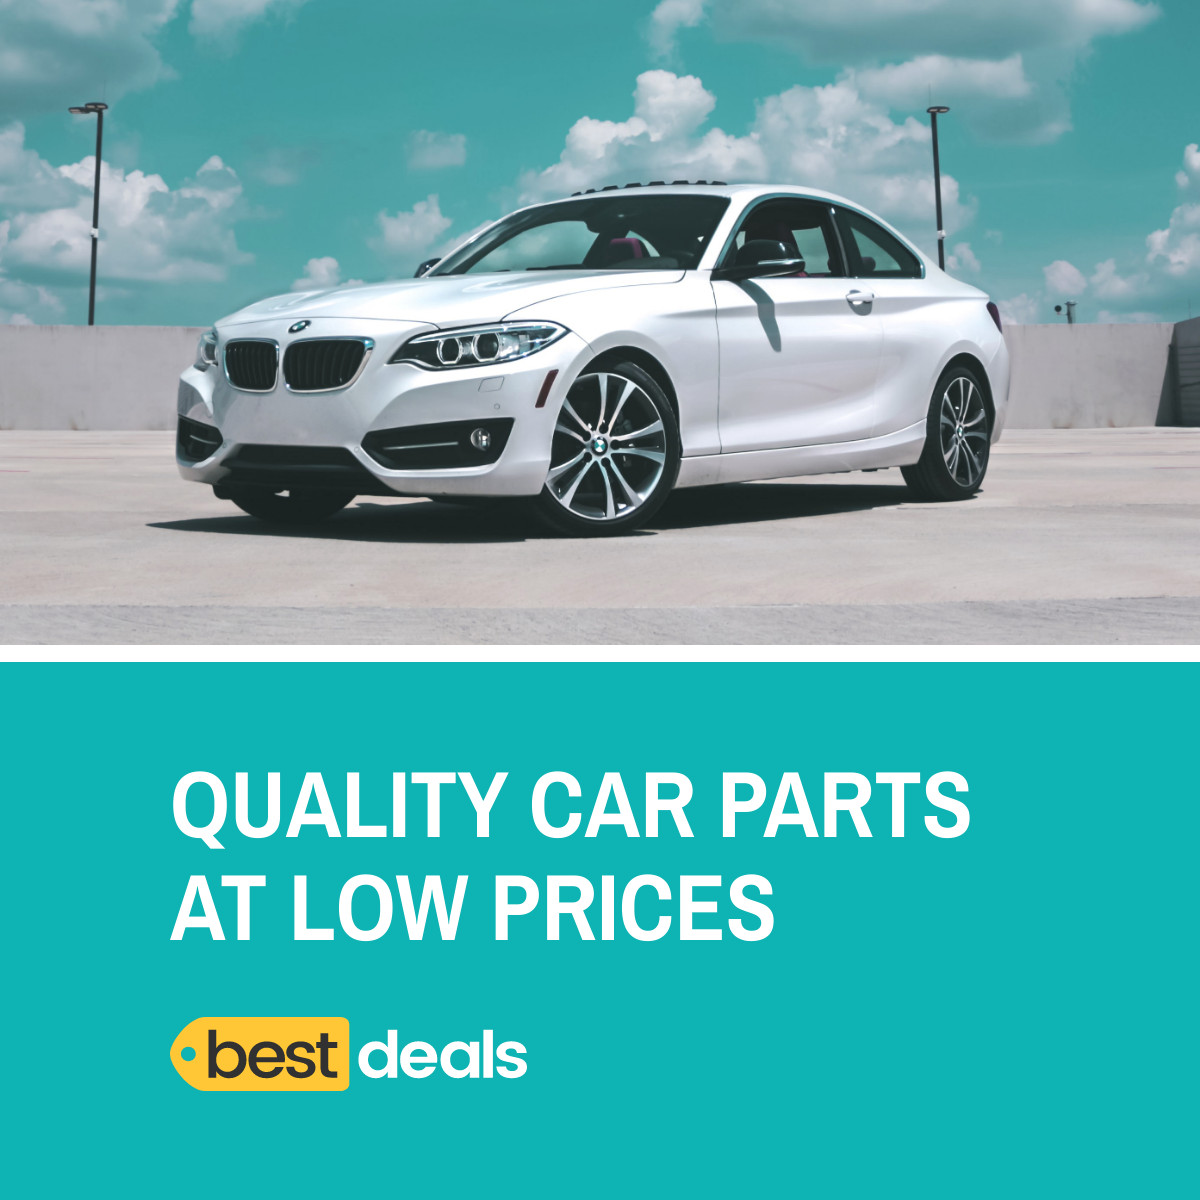 Quality Car Parts at Low Prices